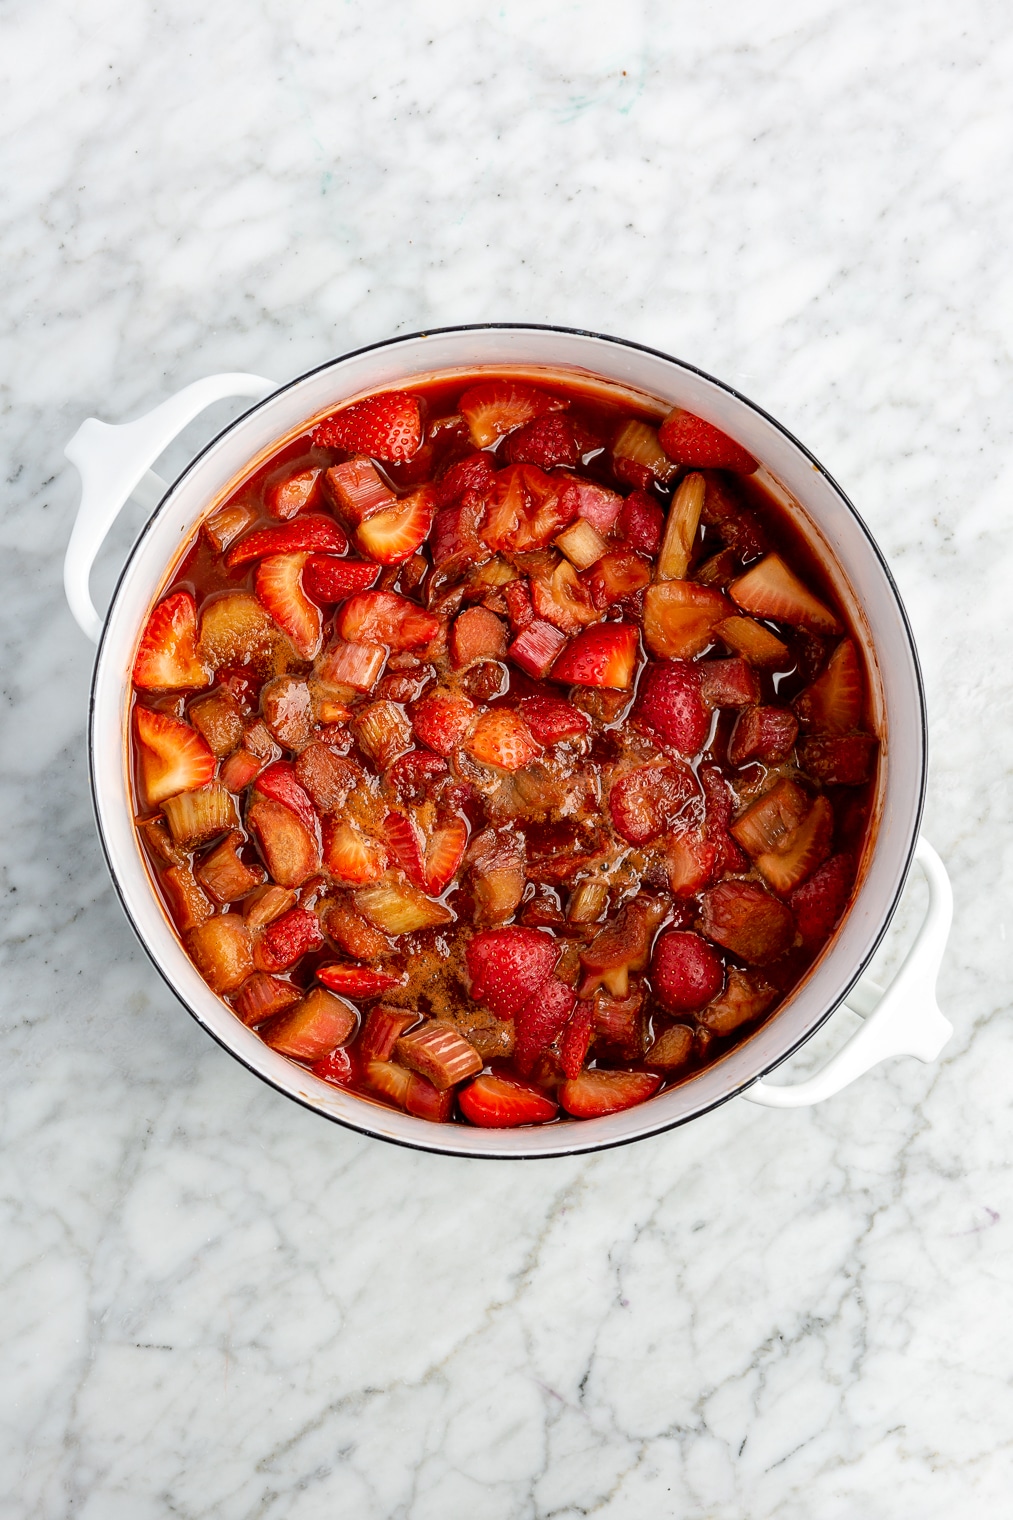 Strawberries and rhubarb in a large dish before being topped with a crumble topping for a strawberry rhubarb crisp.